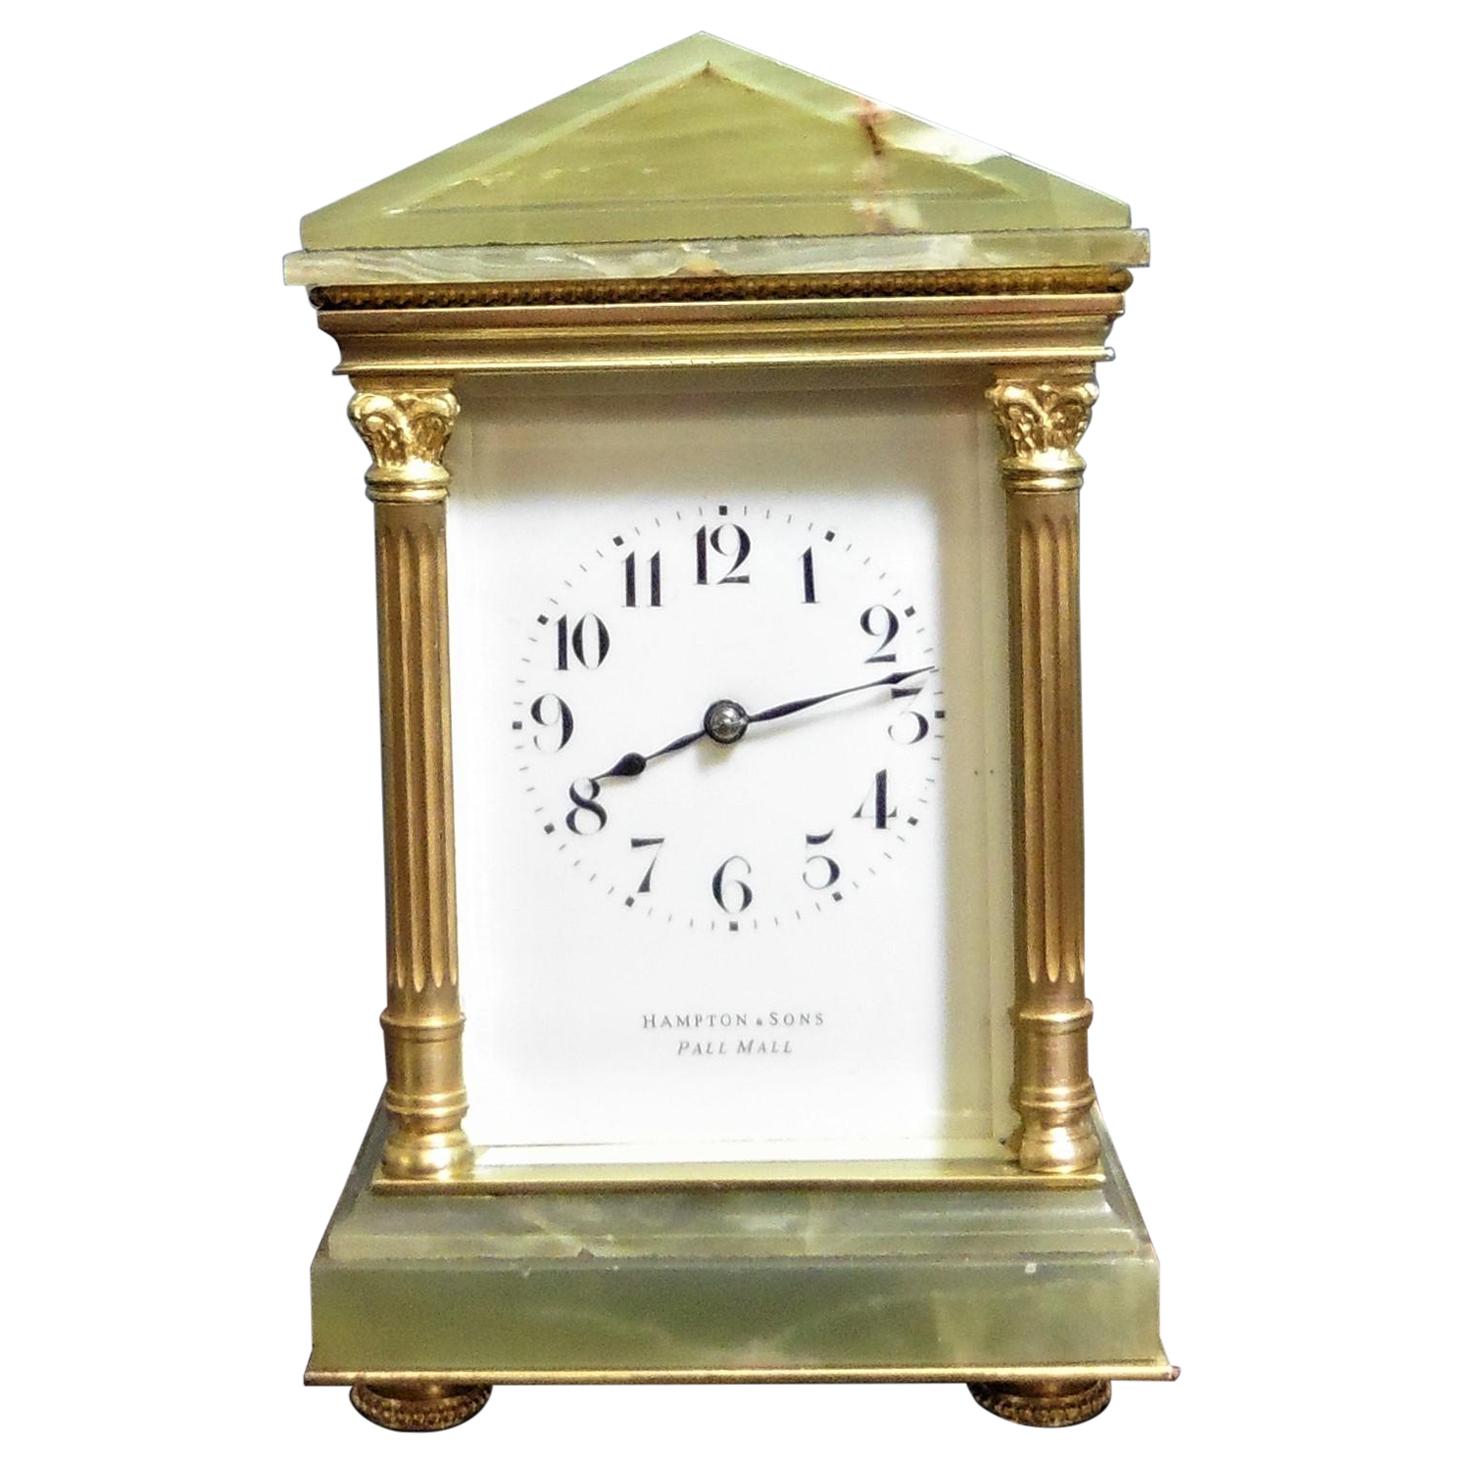 Victorian Carriage Clock signed Hampton & Sons, Pall Mall For Sale